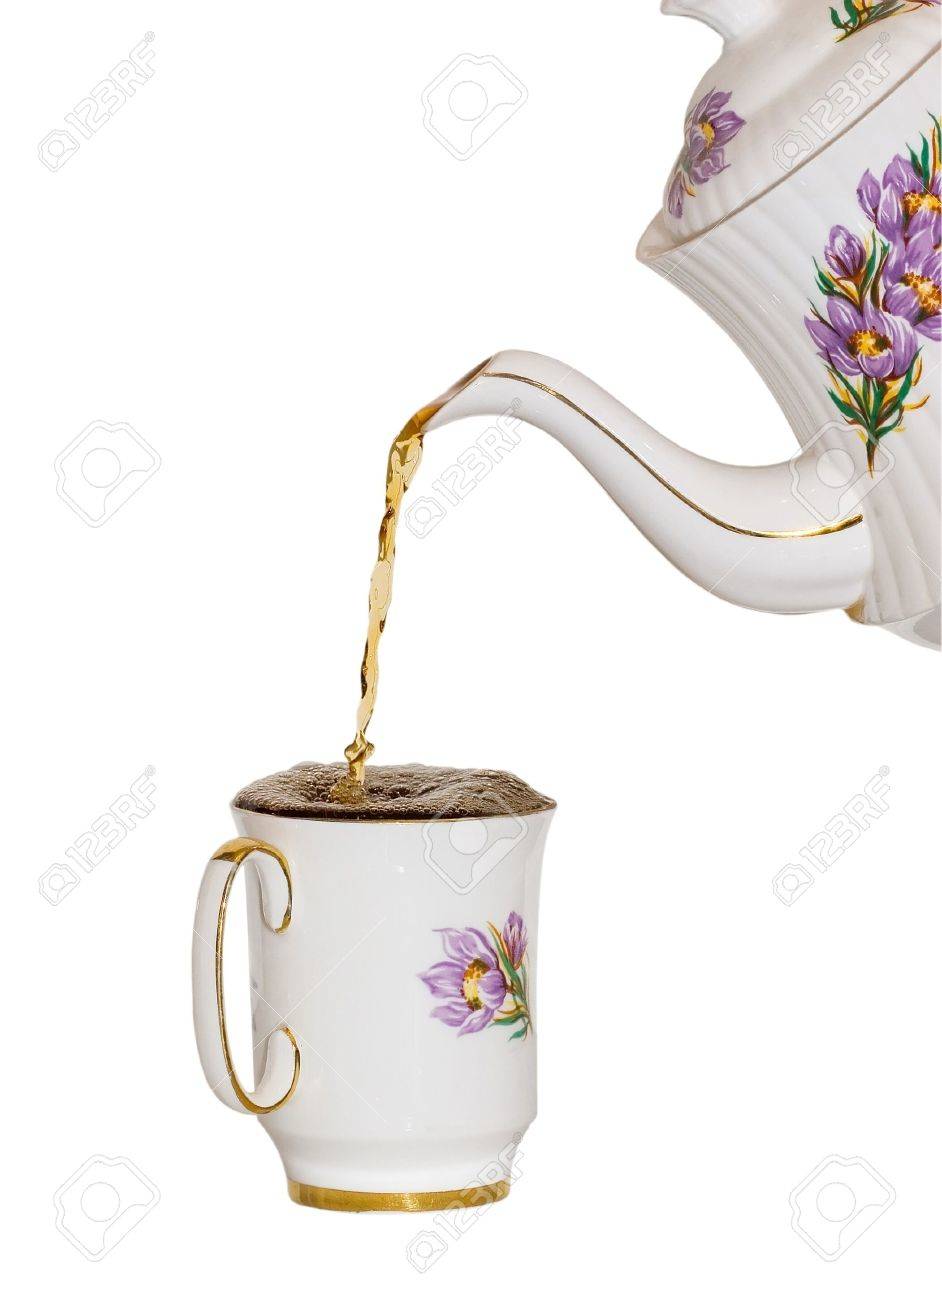 384639-Pouring-a-cup-of-tea-Stock-Photo.jpg